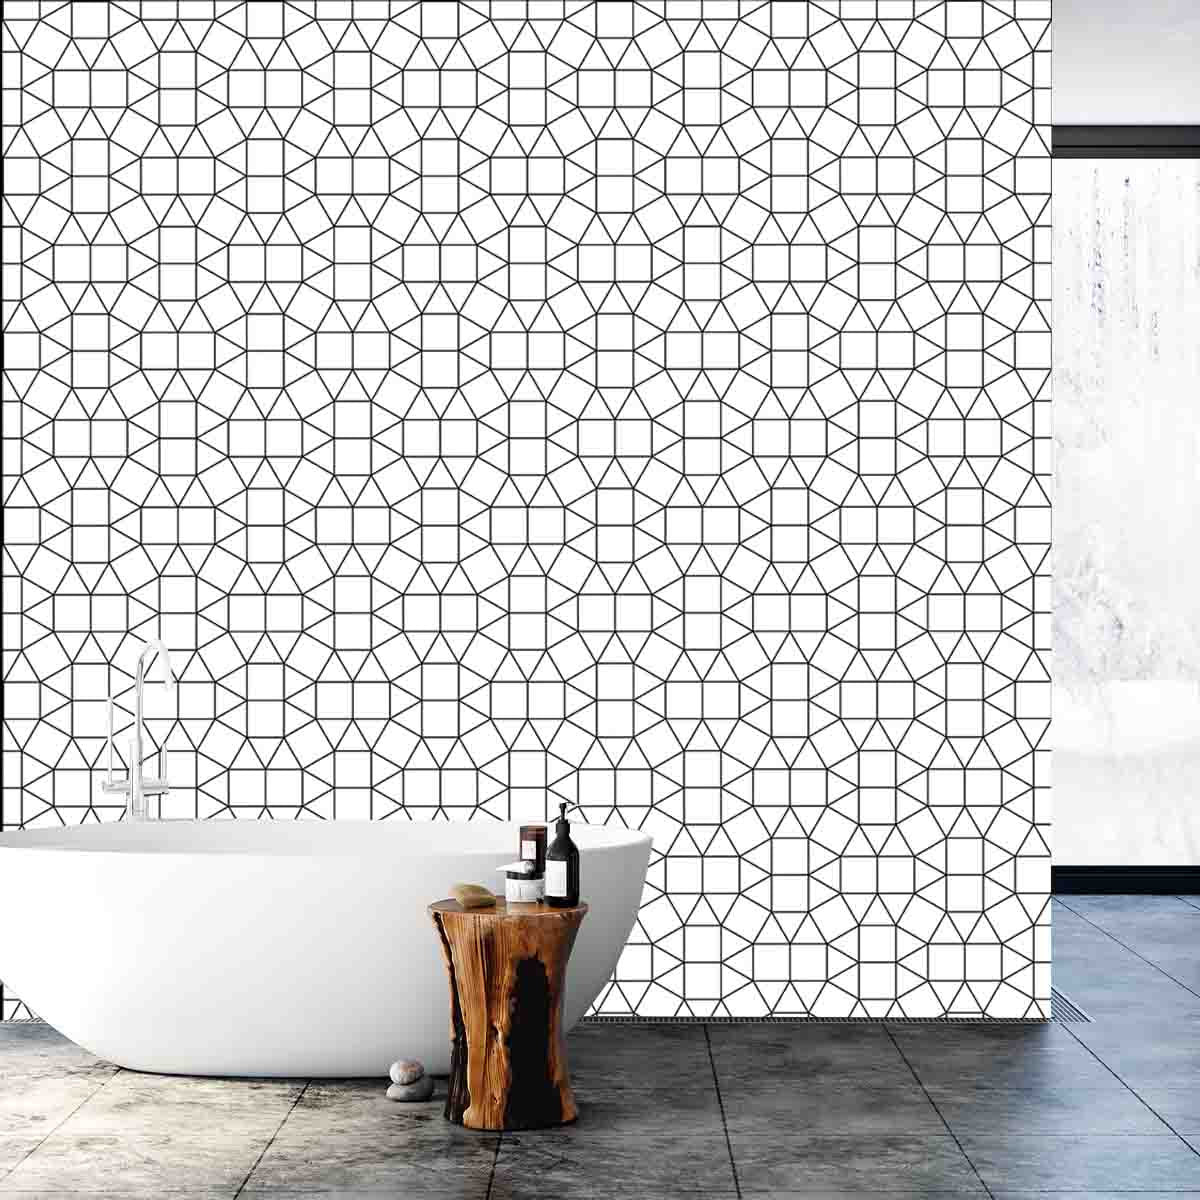 Mosaic Tiles Type with Triangle and Squares Background Wallpaper Bathroom Mural